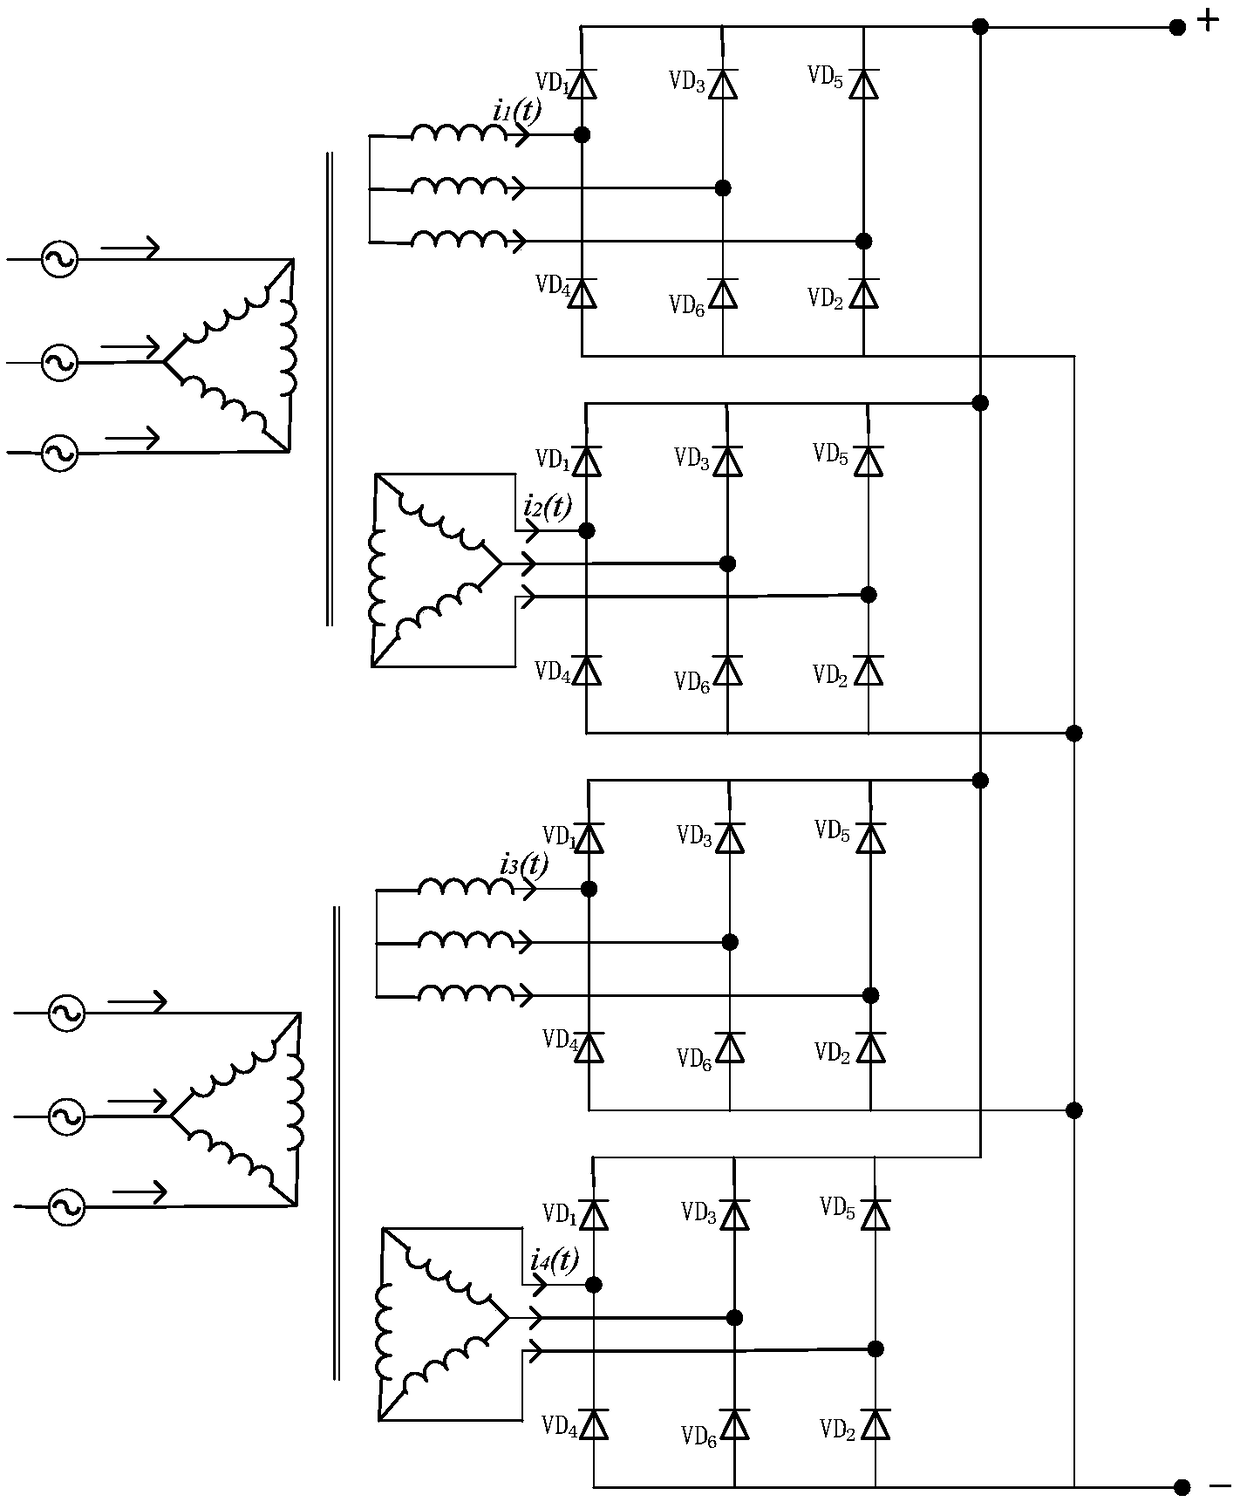 Diagnosis method for diode open-circuit fault of metro rectifier unit based on waveform characteristics